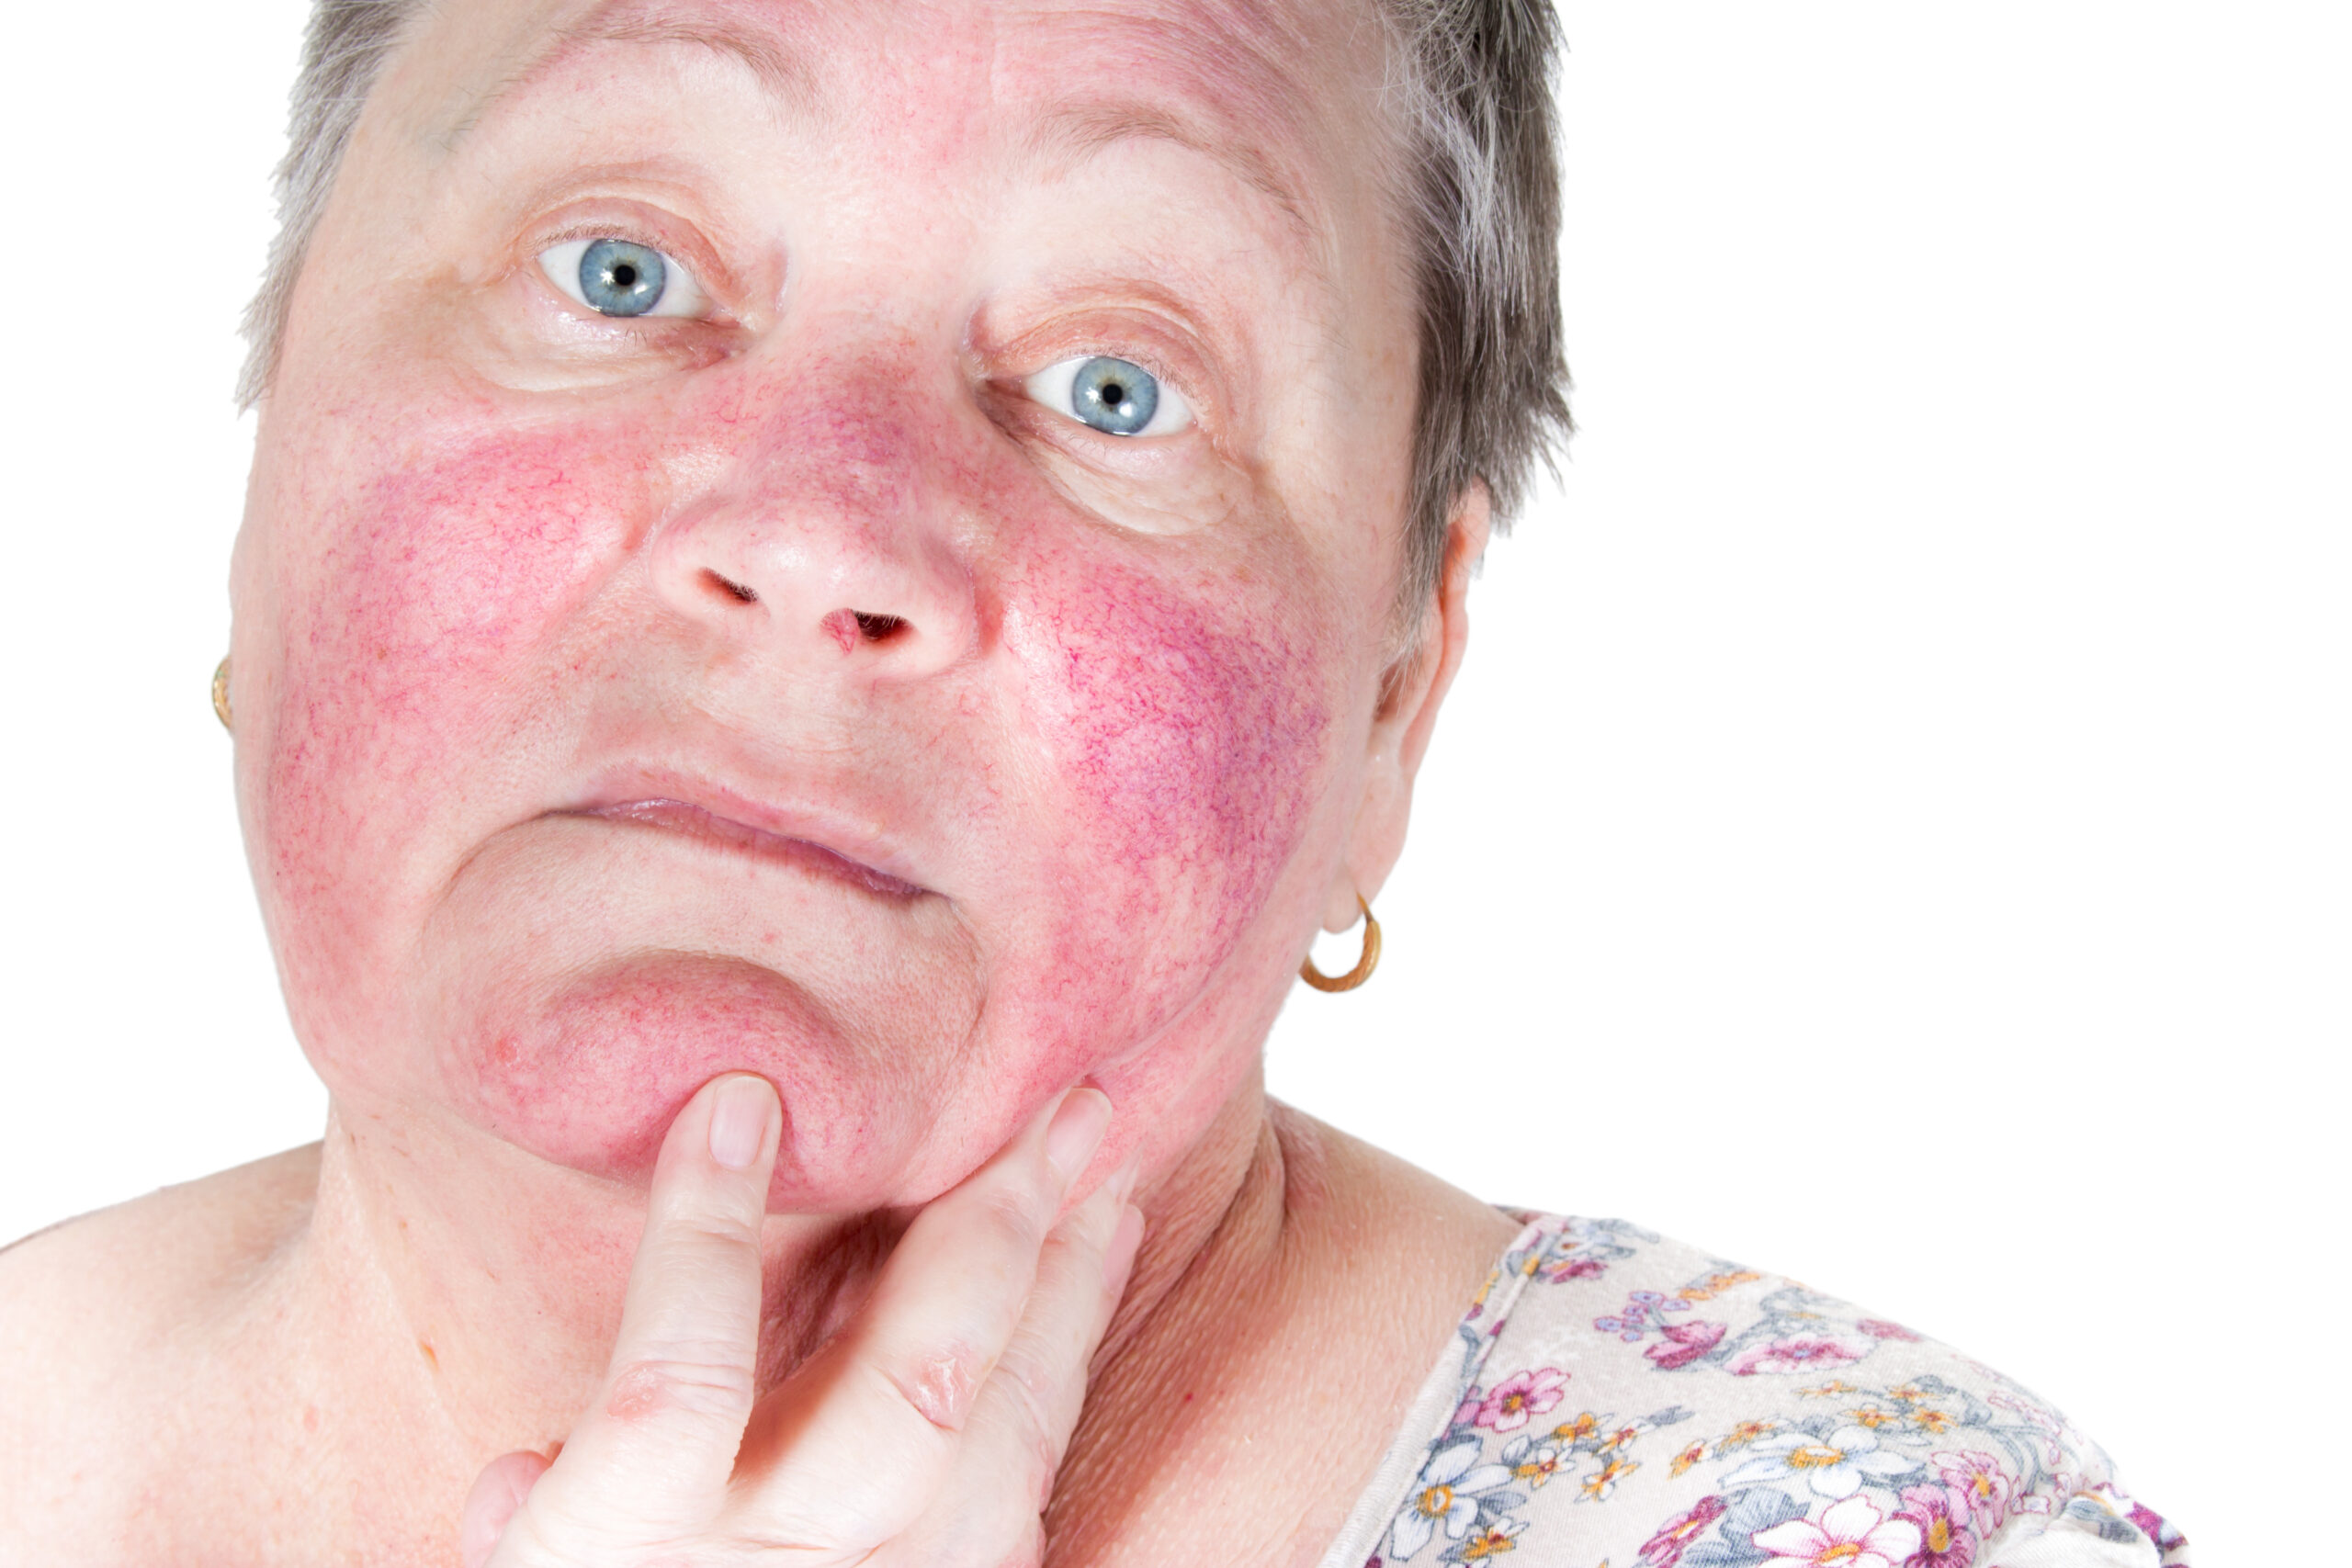 Rosacea is a chronic skin condition characterized by redness, flushing, and the development of visible red blood vessels on the face, in addition to acne-like pustules.